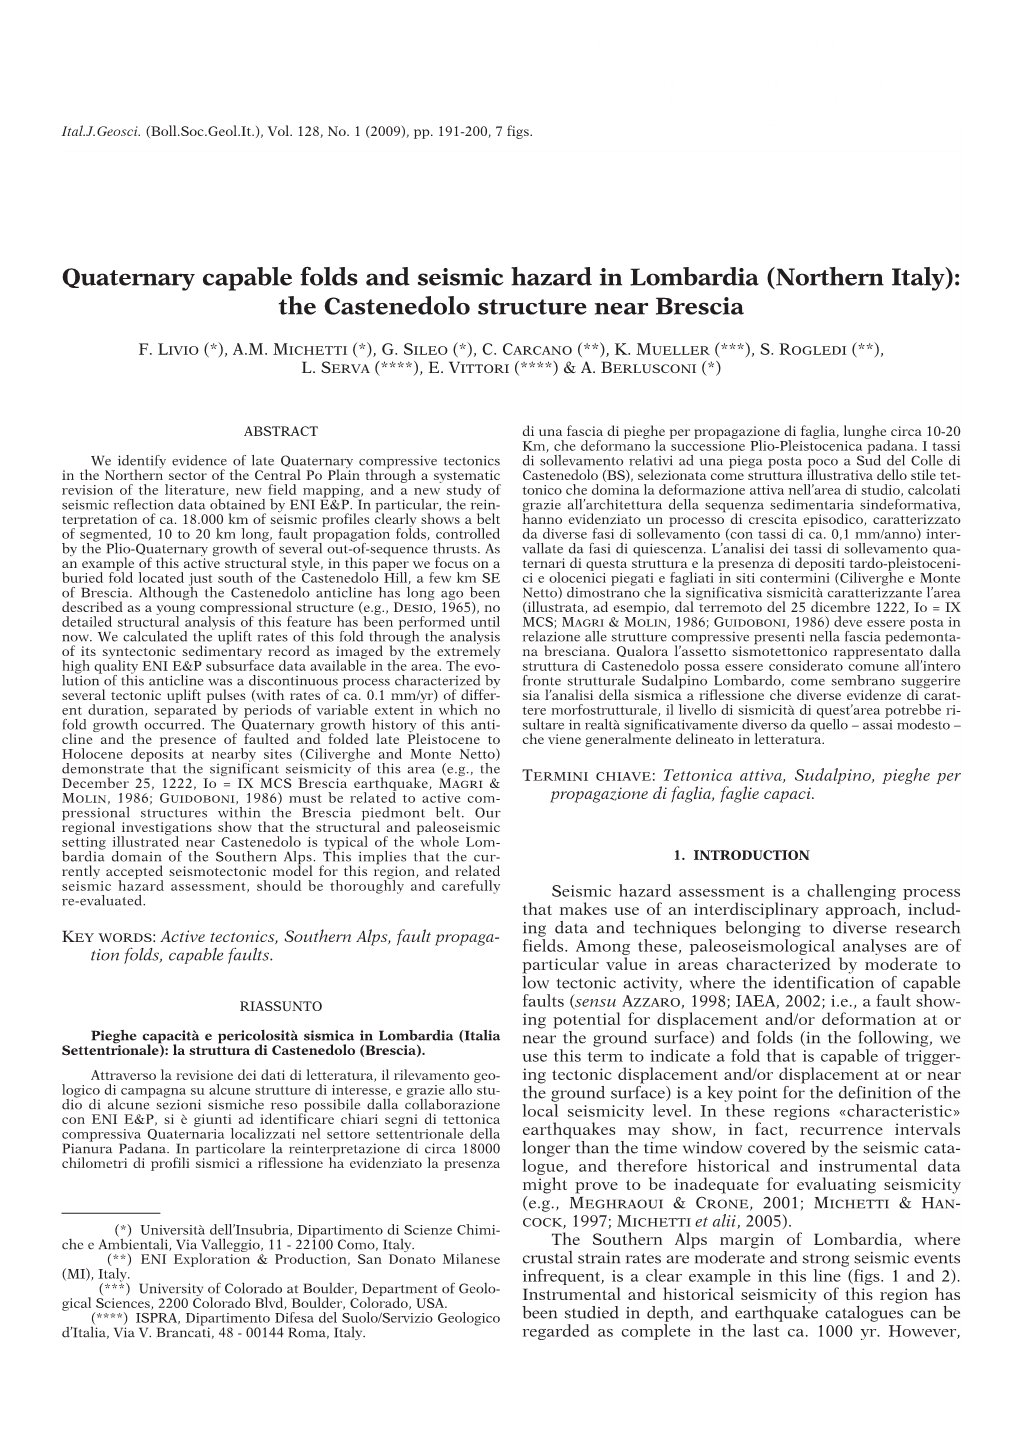 Quaternary Capable Folds and Seismic Hazard in Lombardia (Northern Italy): the Castenedolo Structure Near Brescia